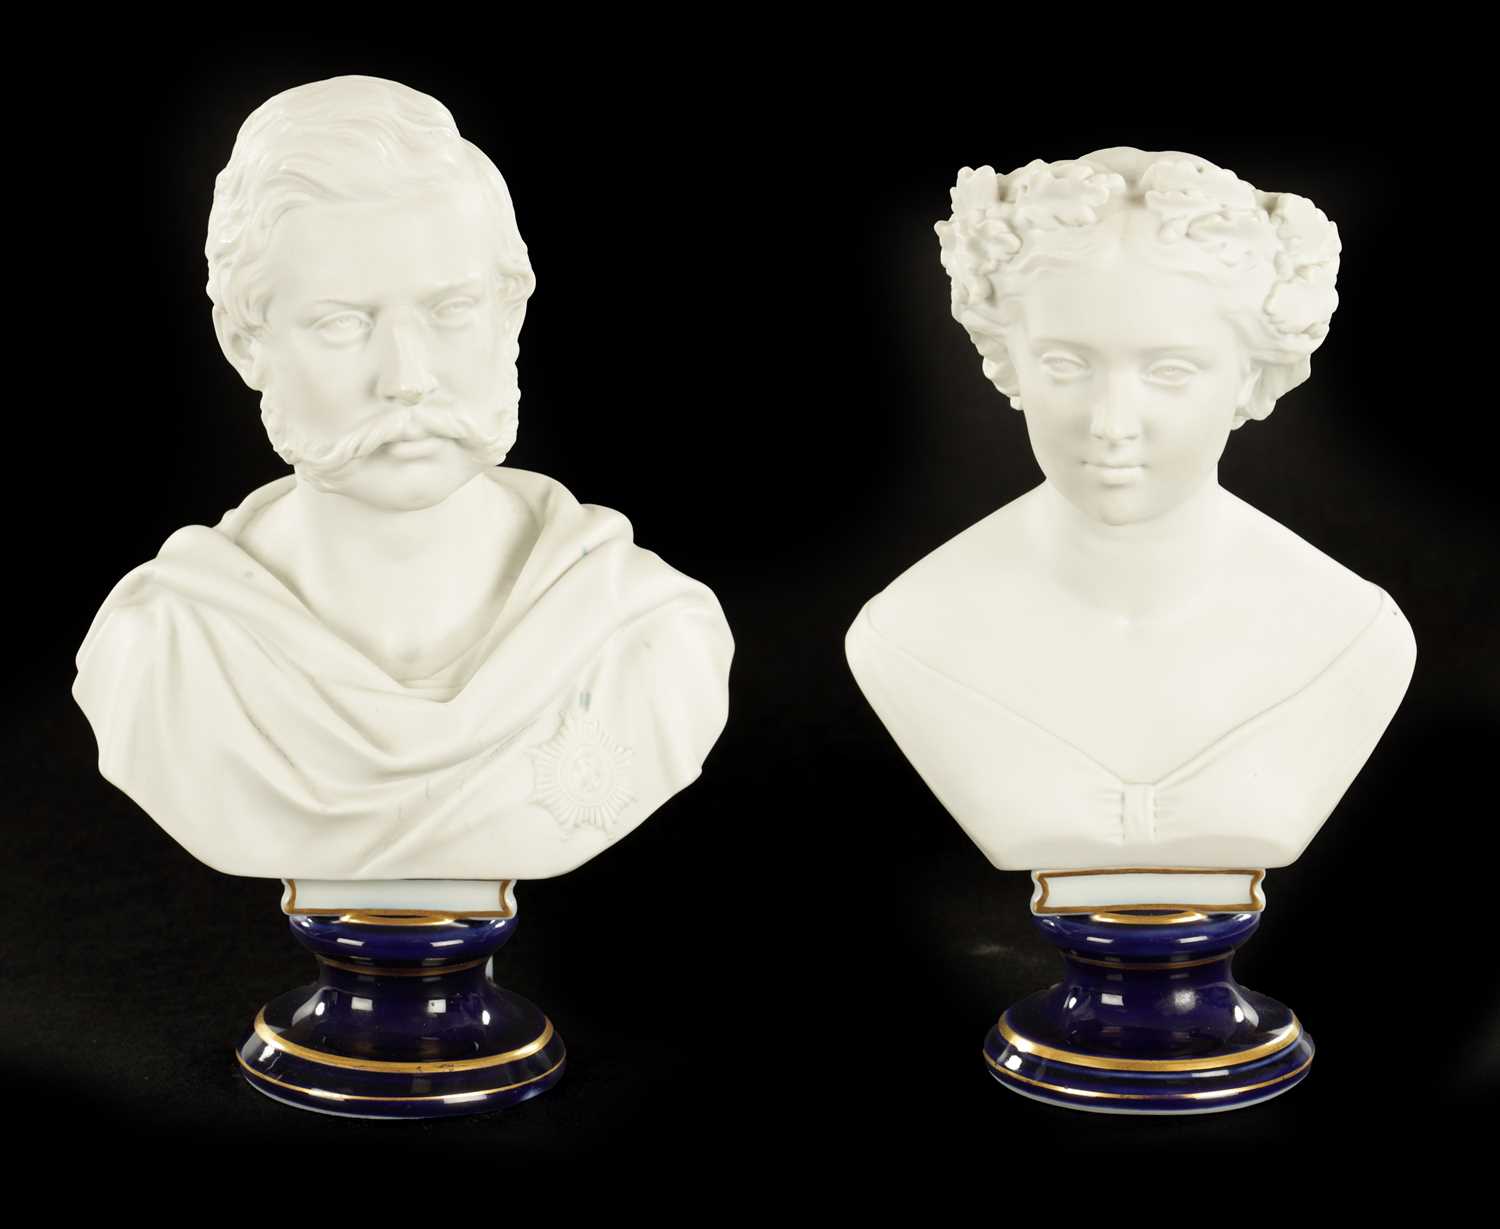 Lot 53 - A PAIR OF LATE 19TH CENTURY GERMAN PARIAN PORCELAIN BUSTS